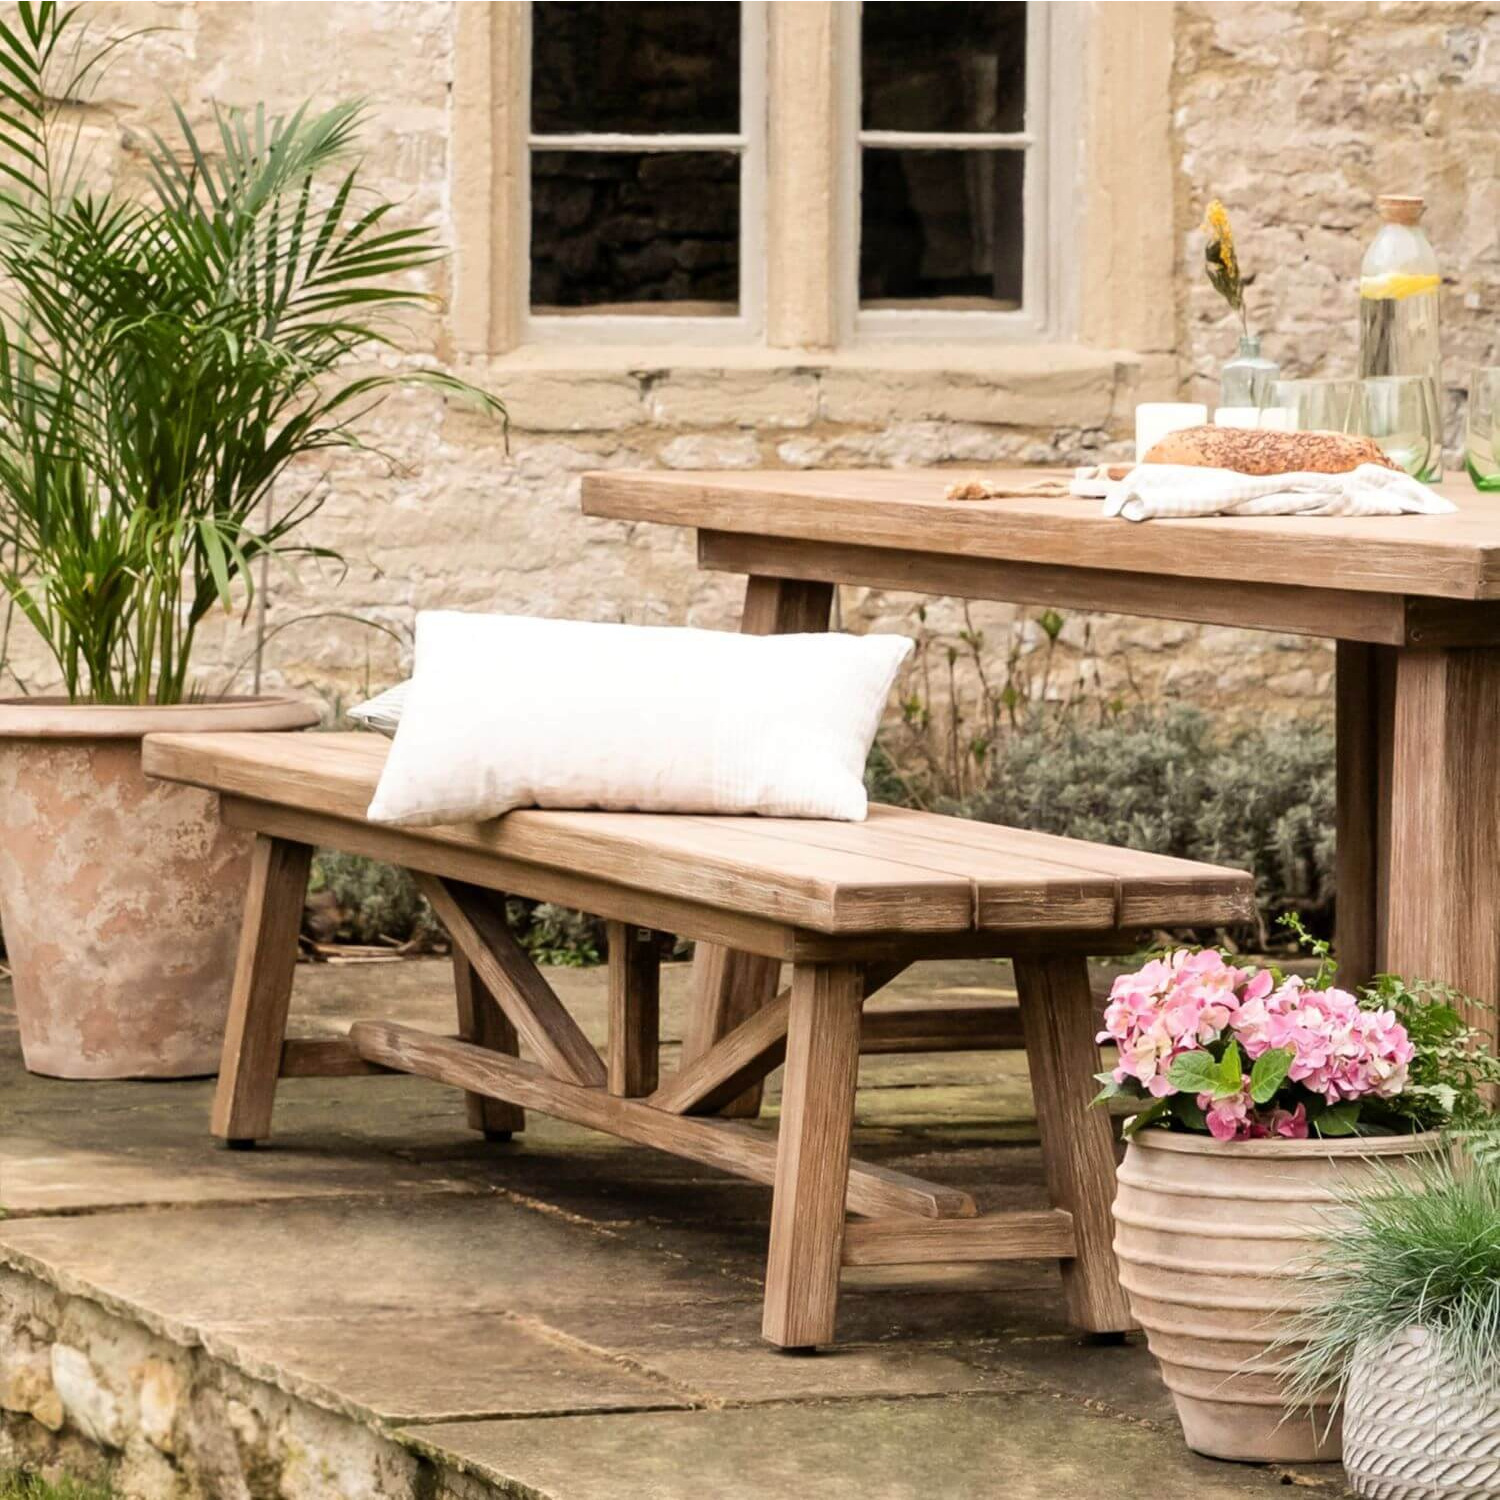 Chilford Outdoor Dining Bench - image 1